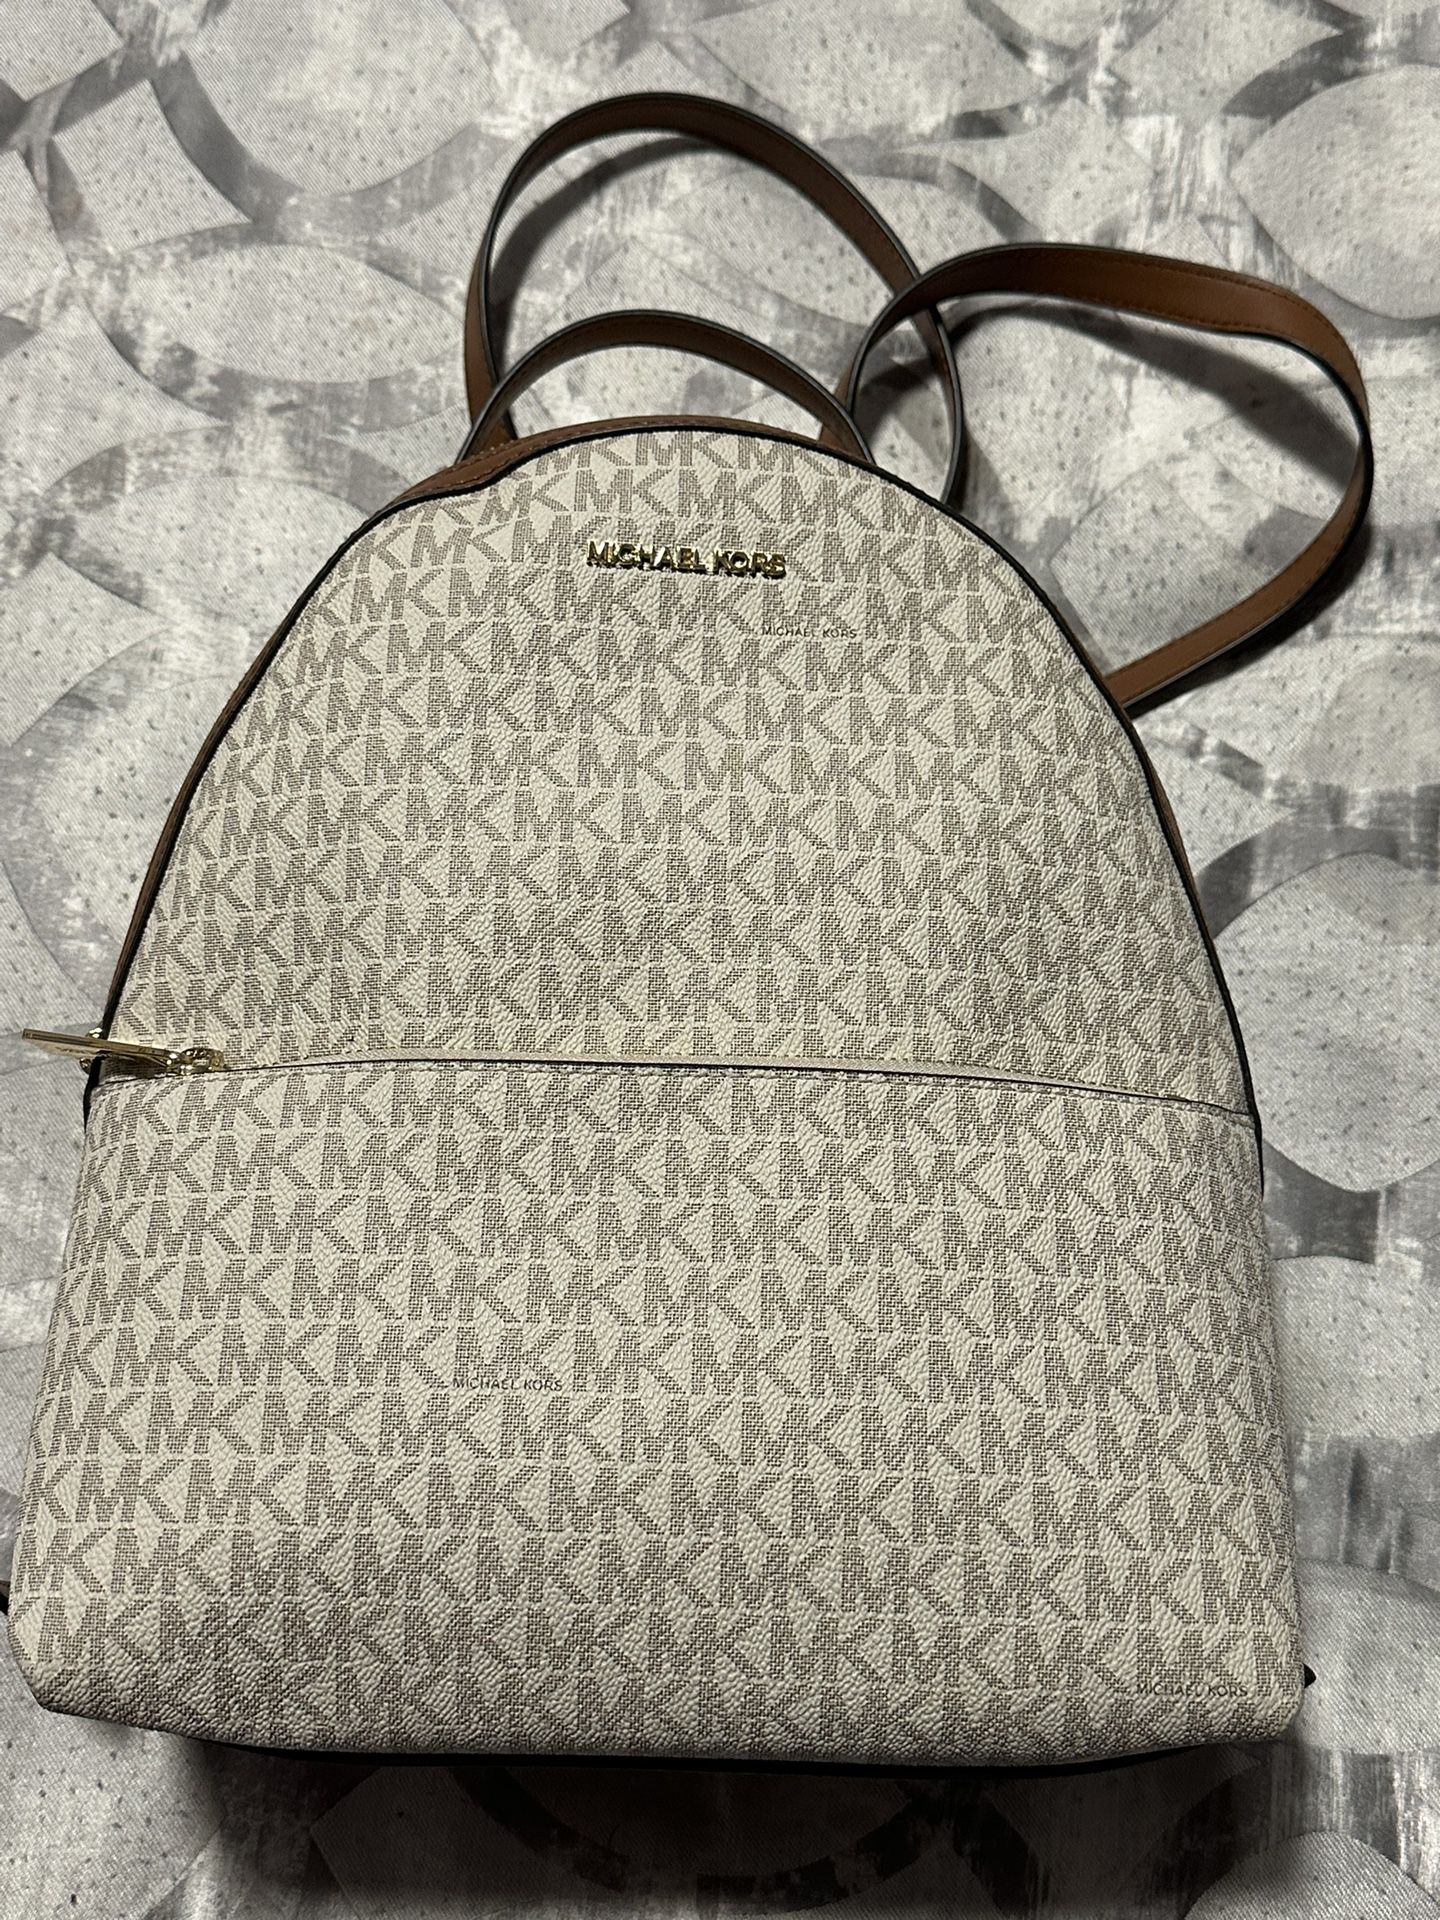 Michael Kors Backpack Authentic 